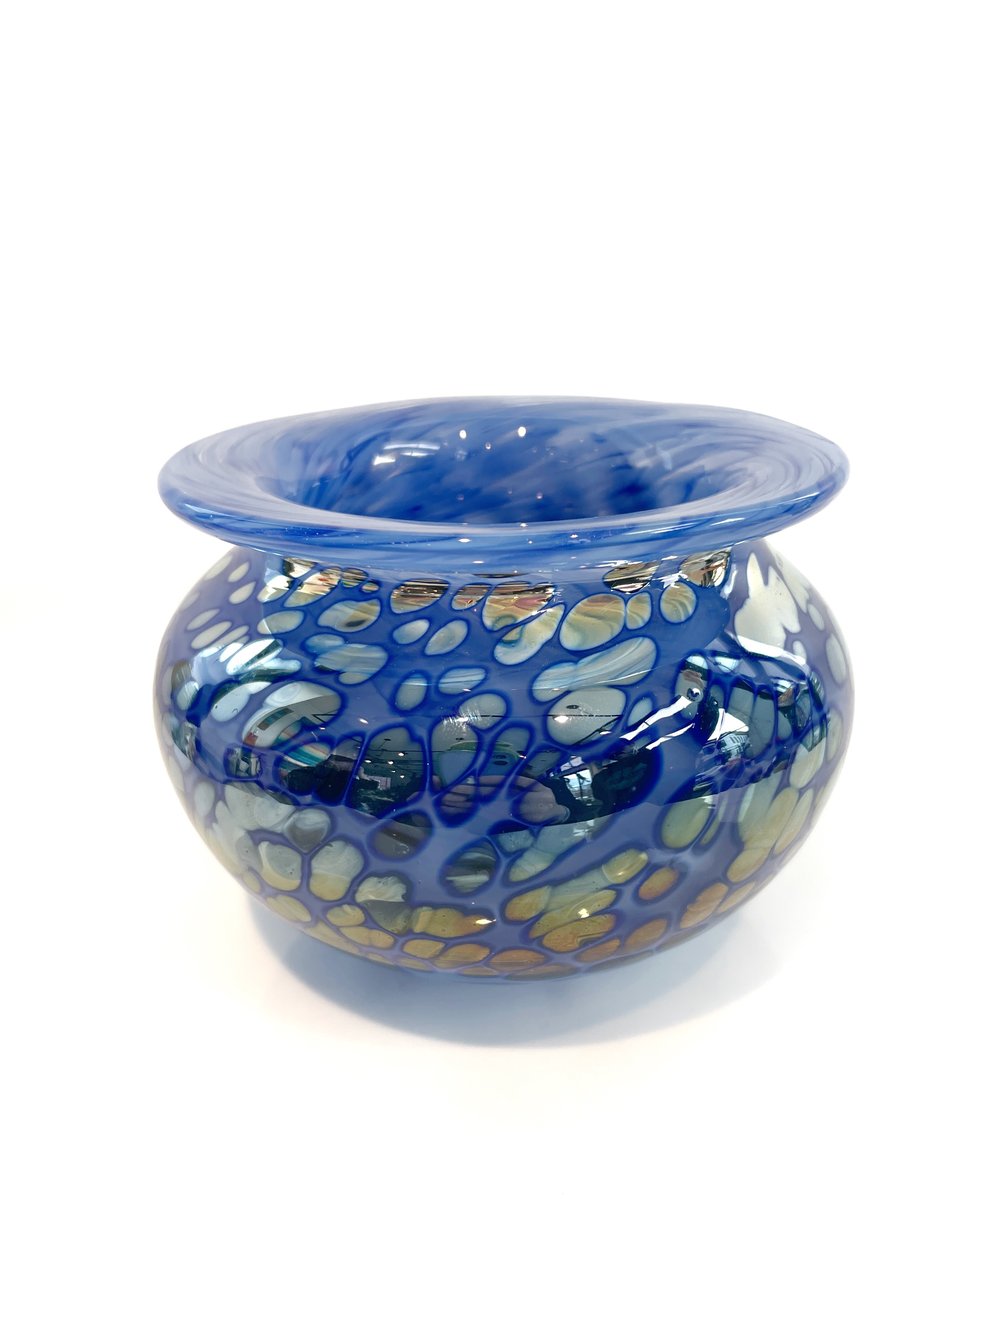 Iridescent Blue Spotted Blown Glass